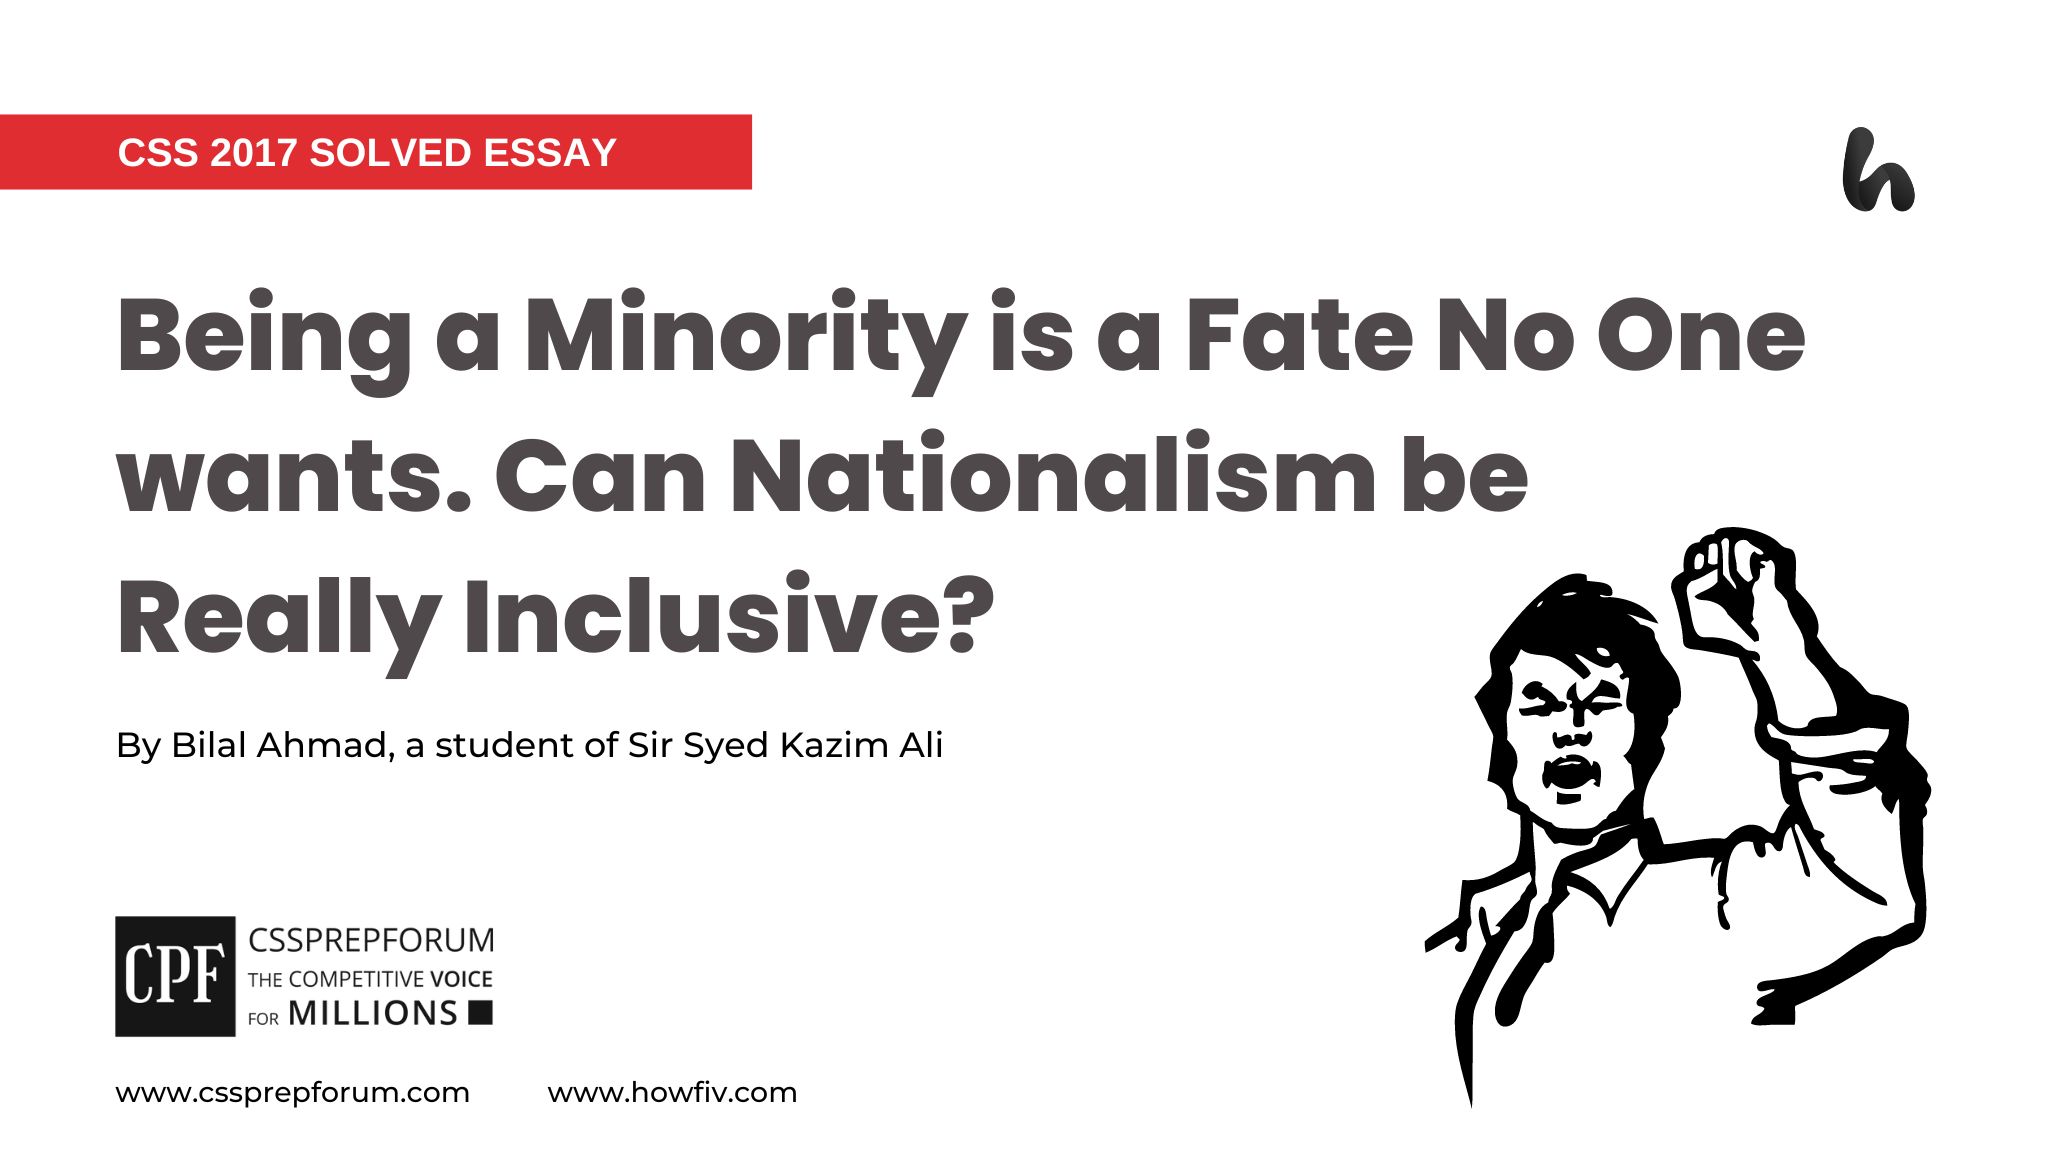 Being a Minority is a Fate No One wants. Can Nationalism be Really Inclusive By Bilal Ahmad